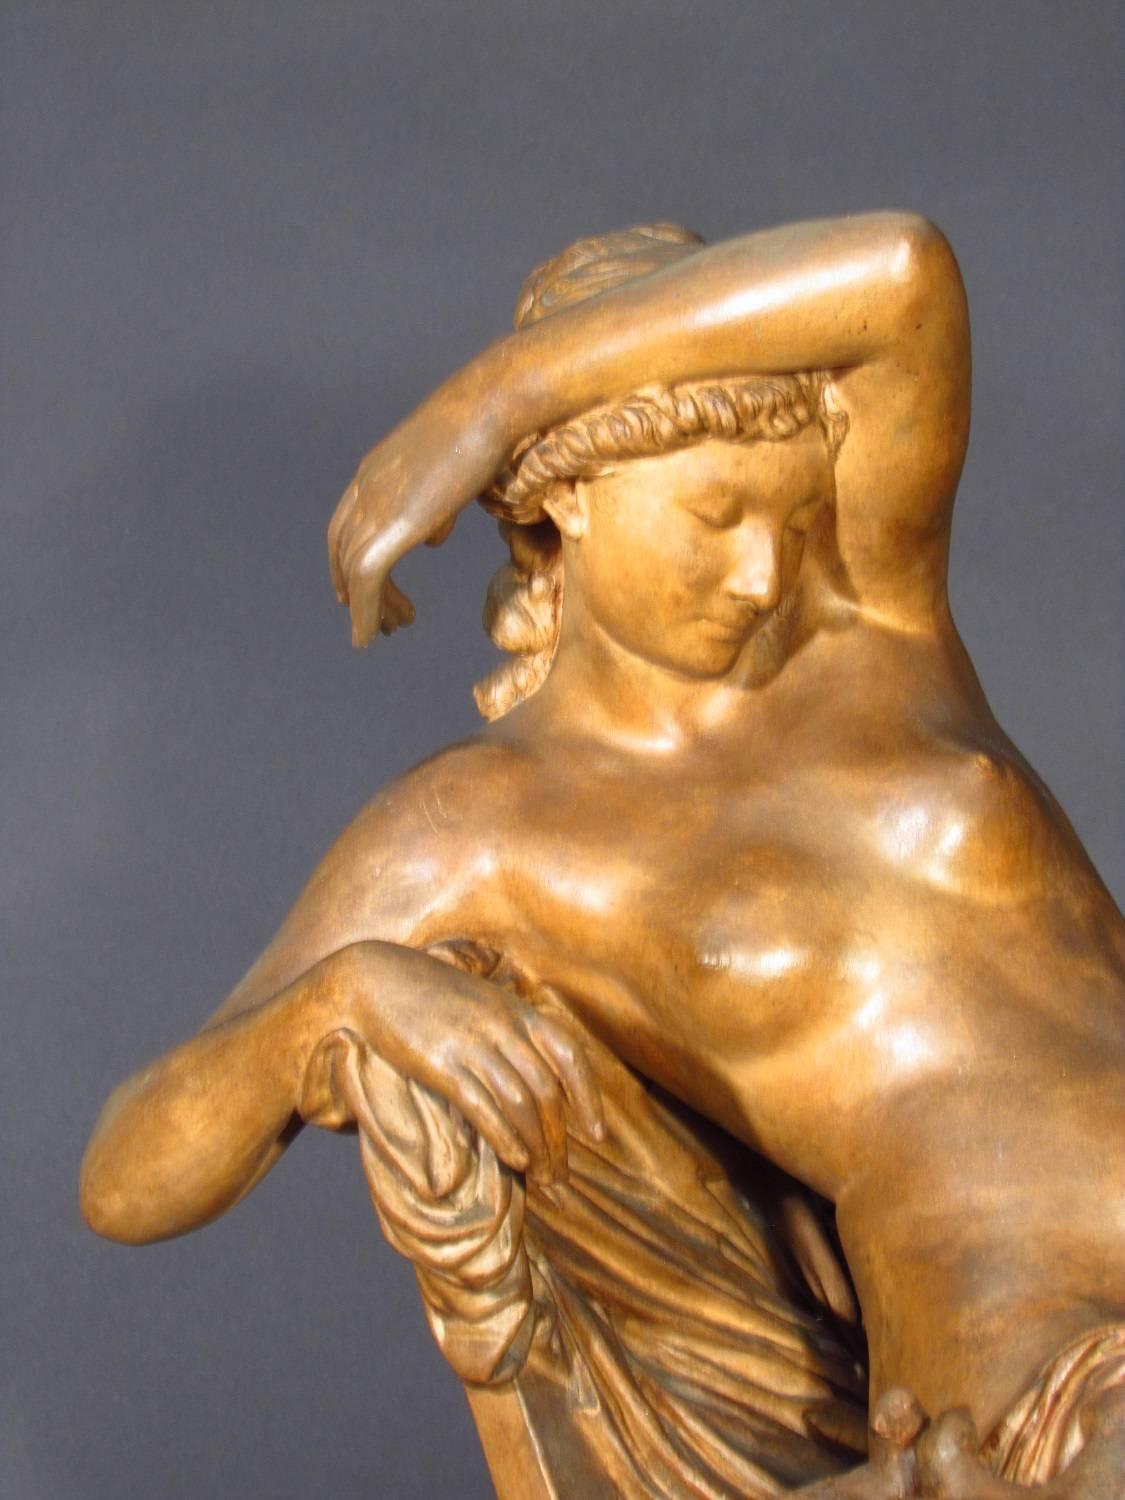 Awakening by Jules Franceschi (1825-1912)

Terracotta figure of a reclining woman in chair with doves.